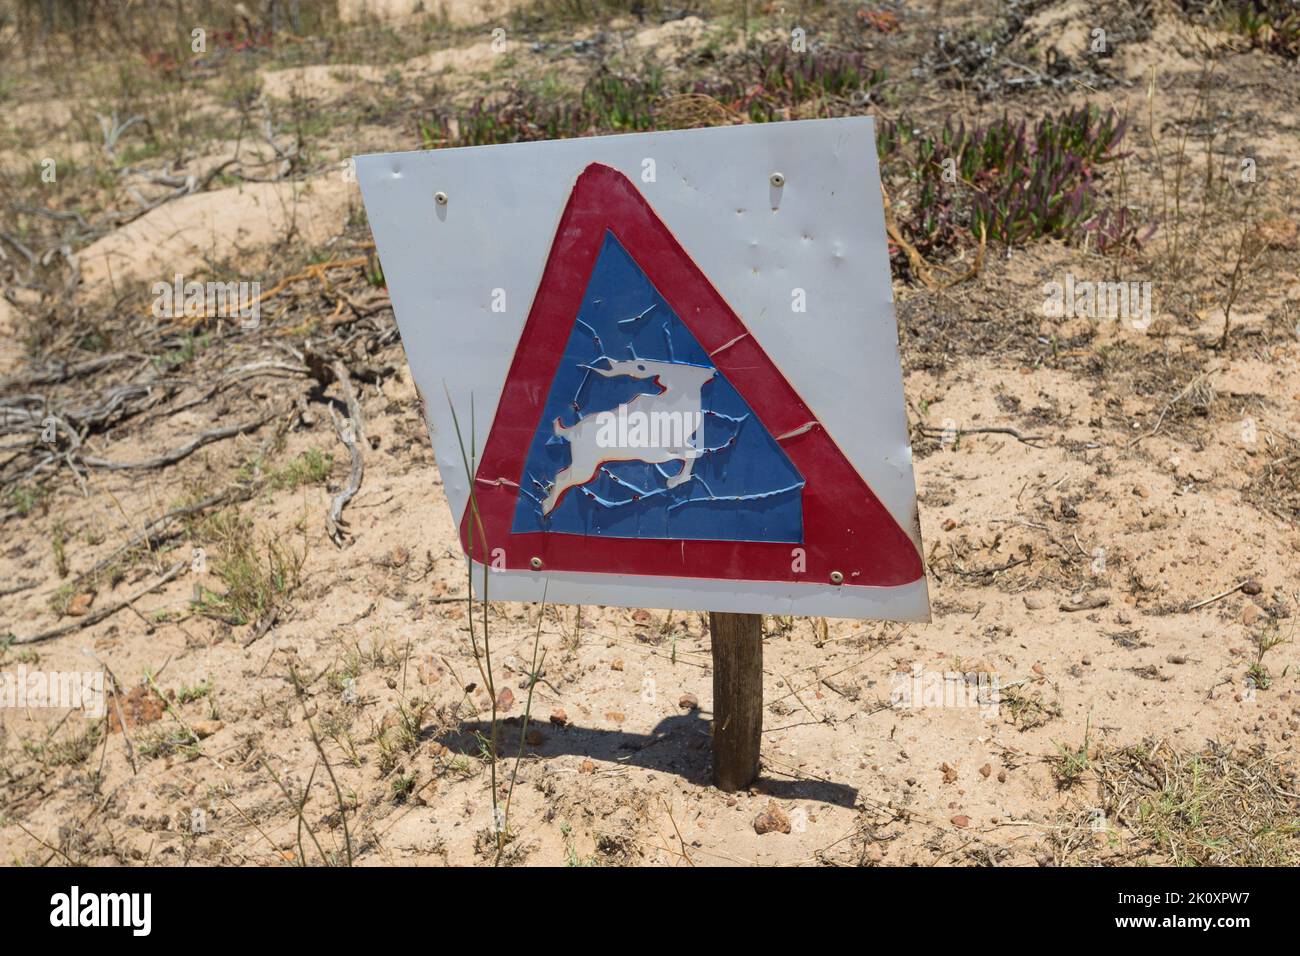 road sign or signage with an antelope or wild animal on a blue and red triangle showing caution when driving concept road safety in South Africa Stock Photo